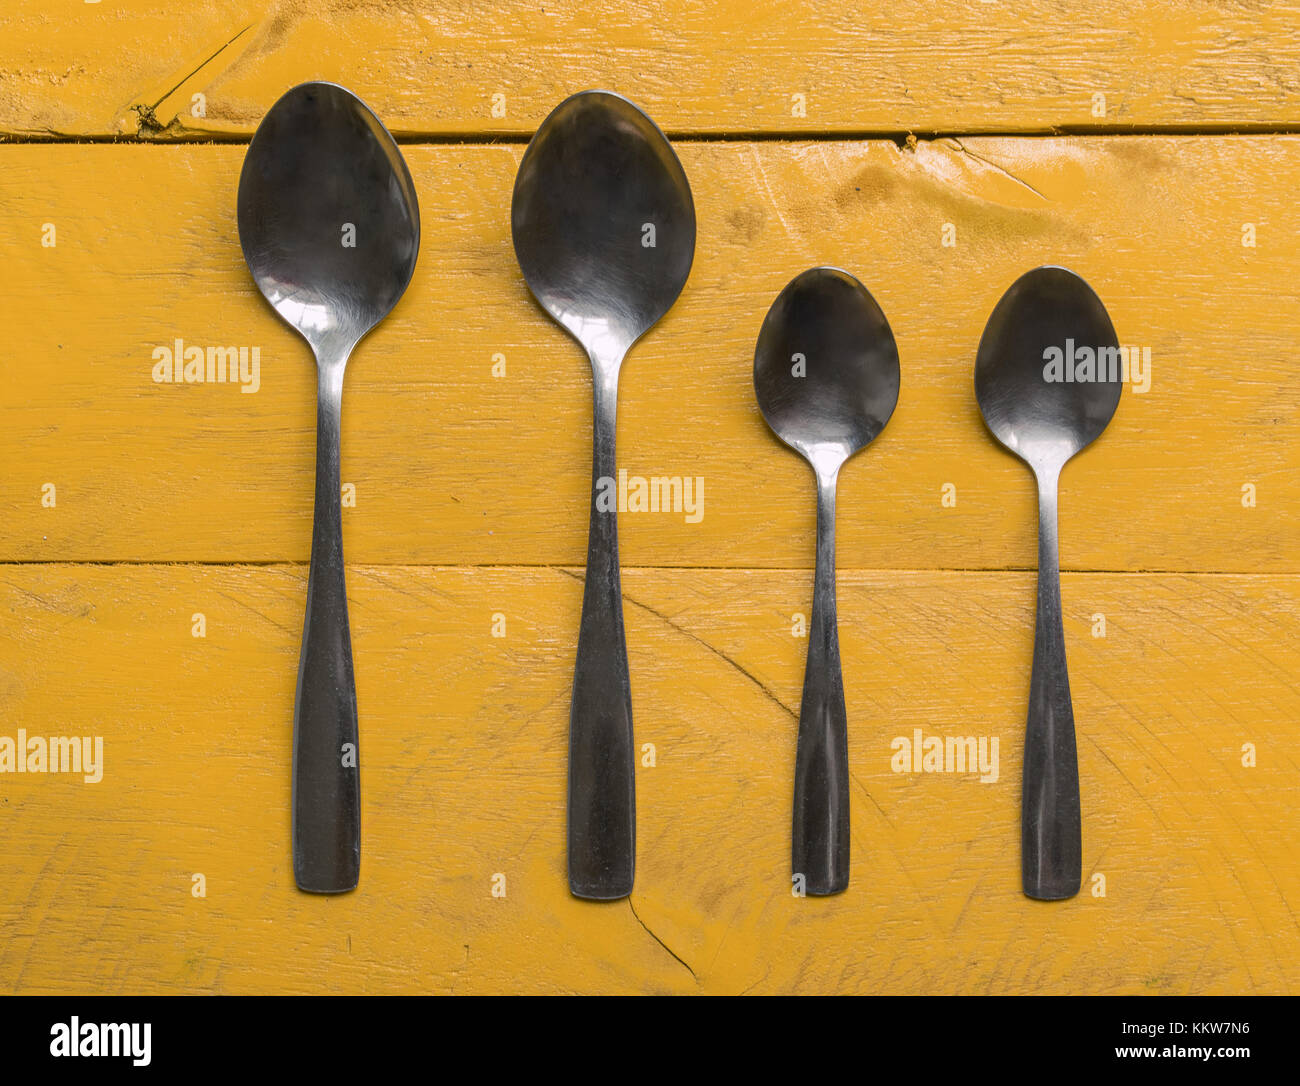 Set of four silver spoons on top of a yellow wooden surface background tabletop, aligned and organized Stock Photo